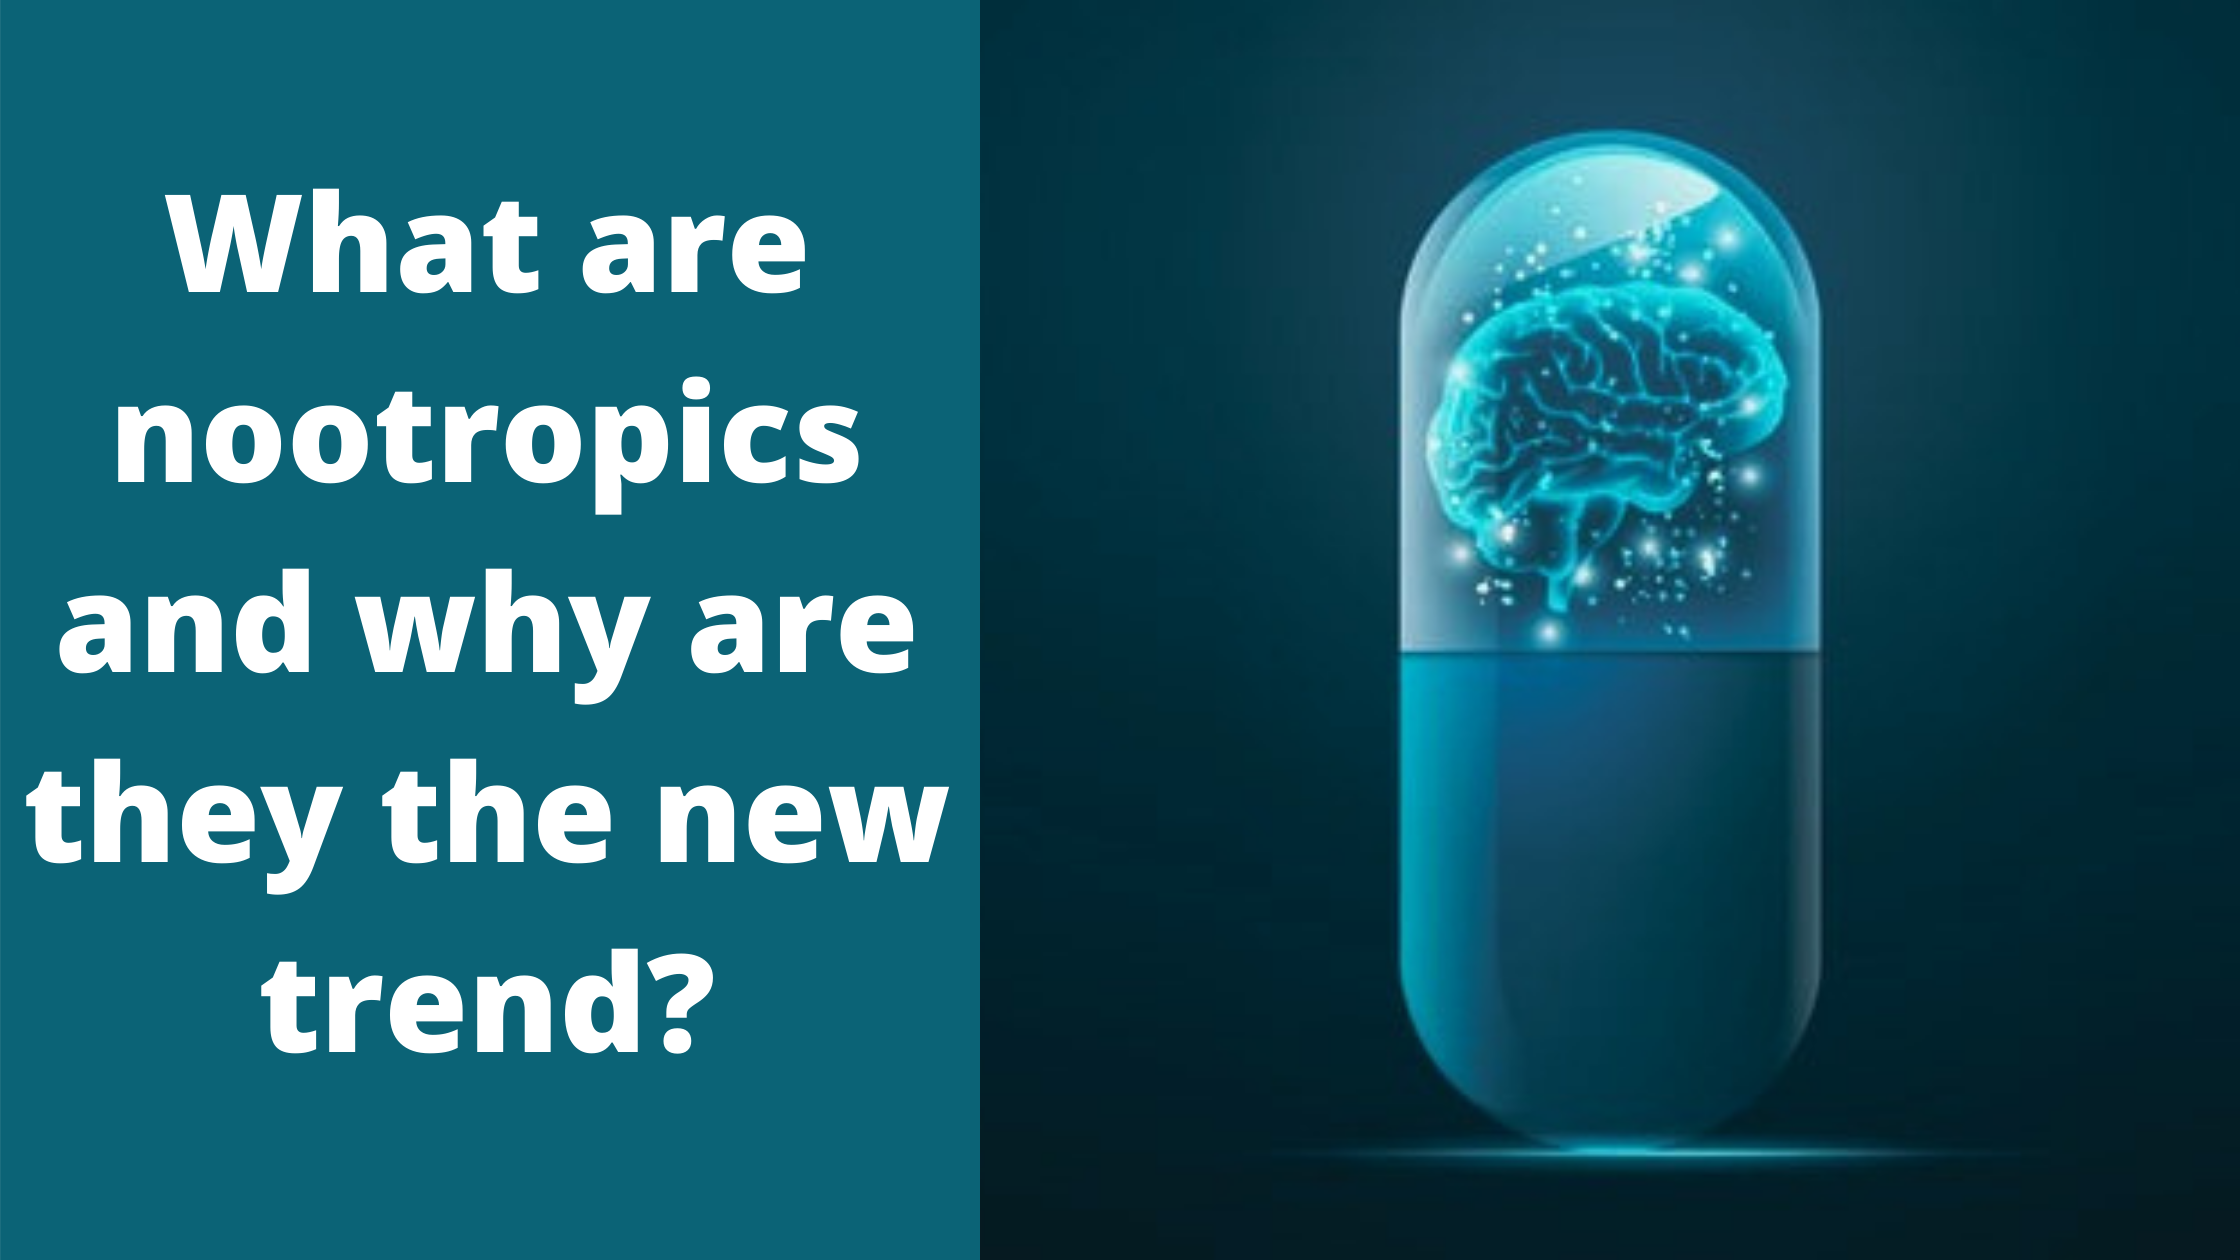 What are nootropics and why are they the new trend?